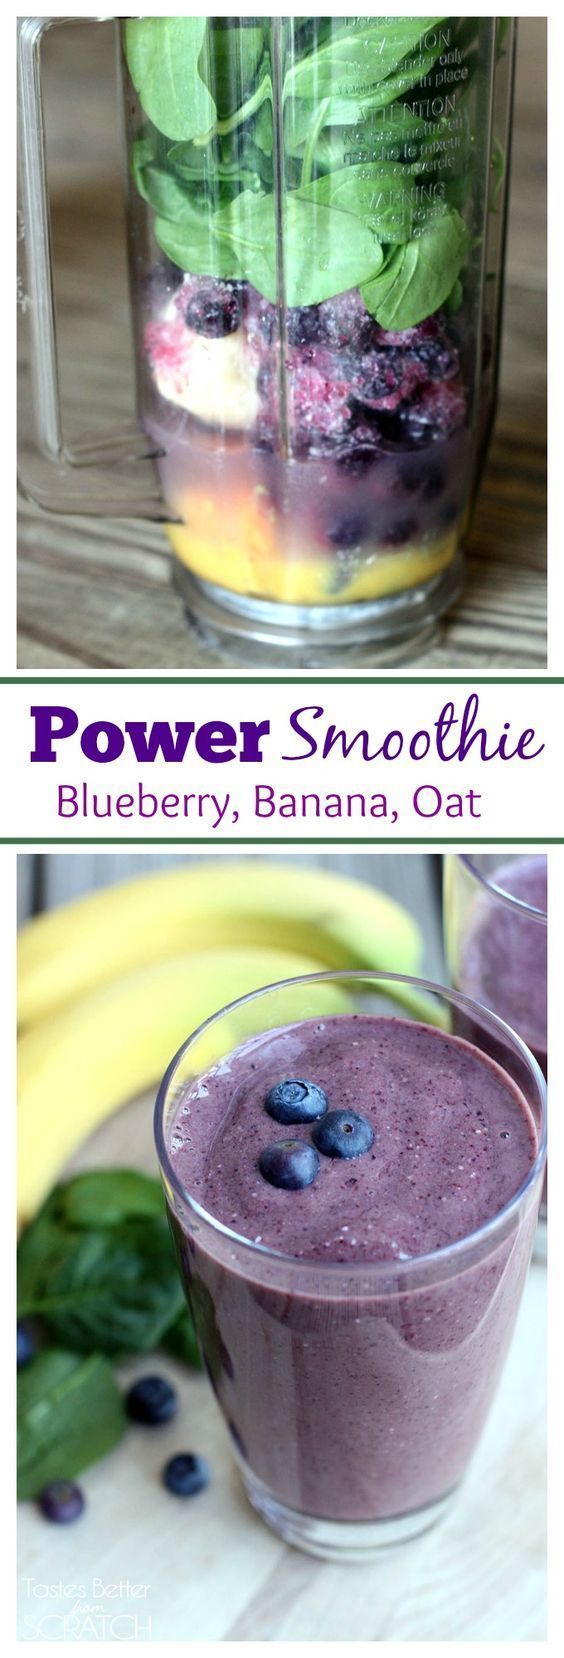 Find great ideas for breakfast on the go, such as this power smoothie, in this awesome article. | easy breakfast recipes | quick healthy breakfast recipes | 300 calorie breakfast ideas | weight loss breakfast | healthy breakfast on the go #health #weightloss #fitness #mealprep #healthyeating #healthyrecipes #nobake